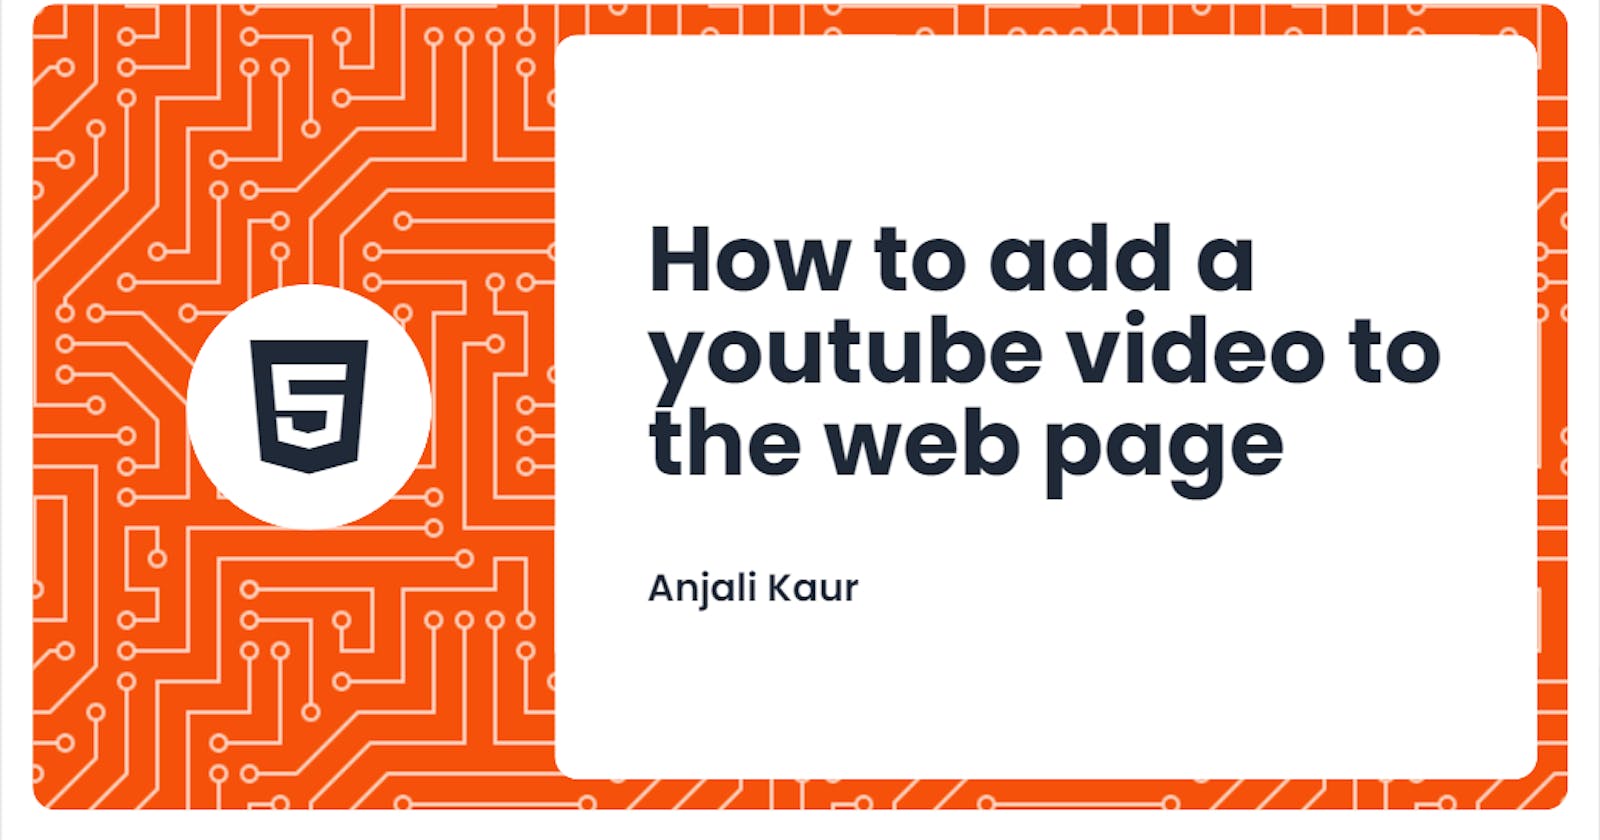 How to add a youtube video to the web page